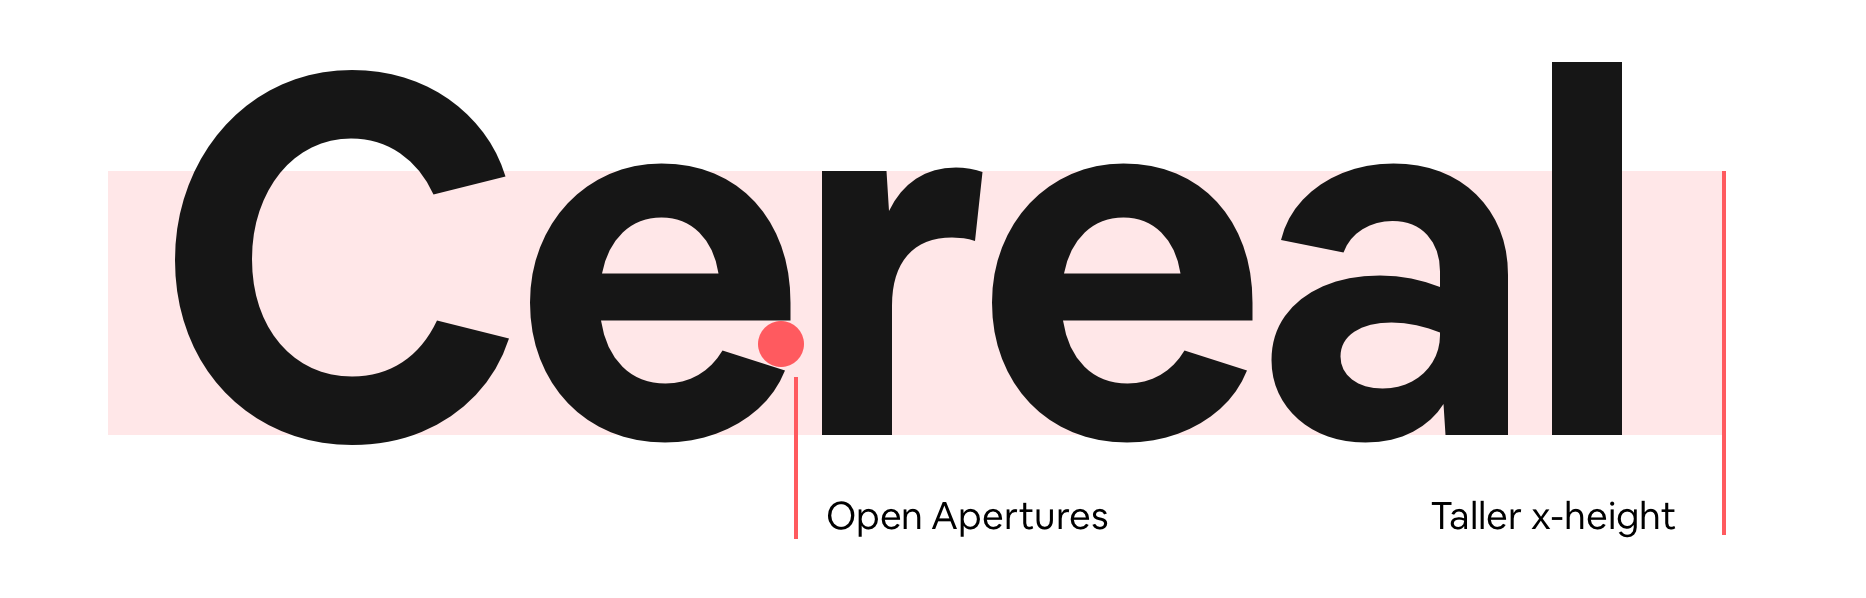 Airbnb Cereal shown with open apertures